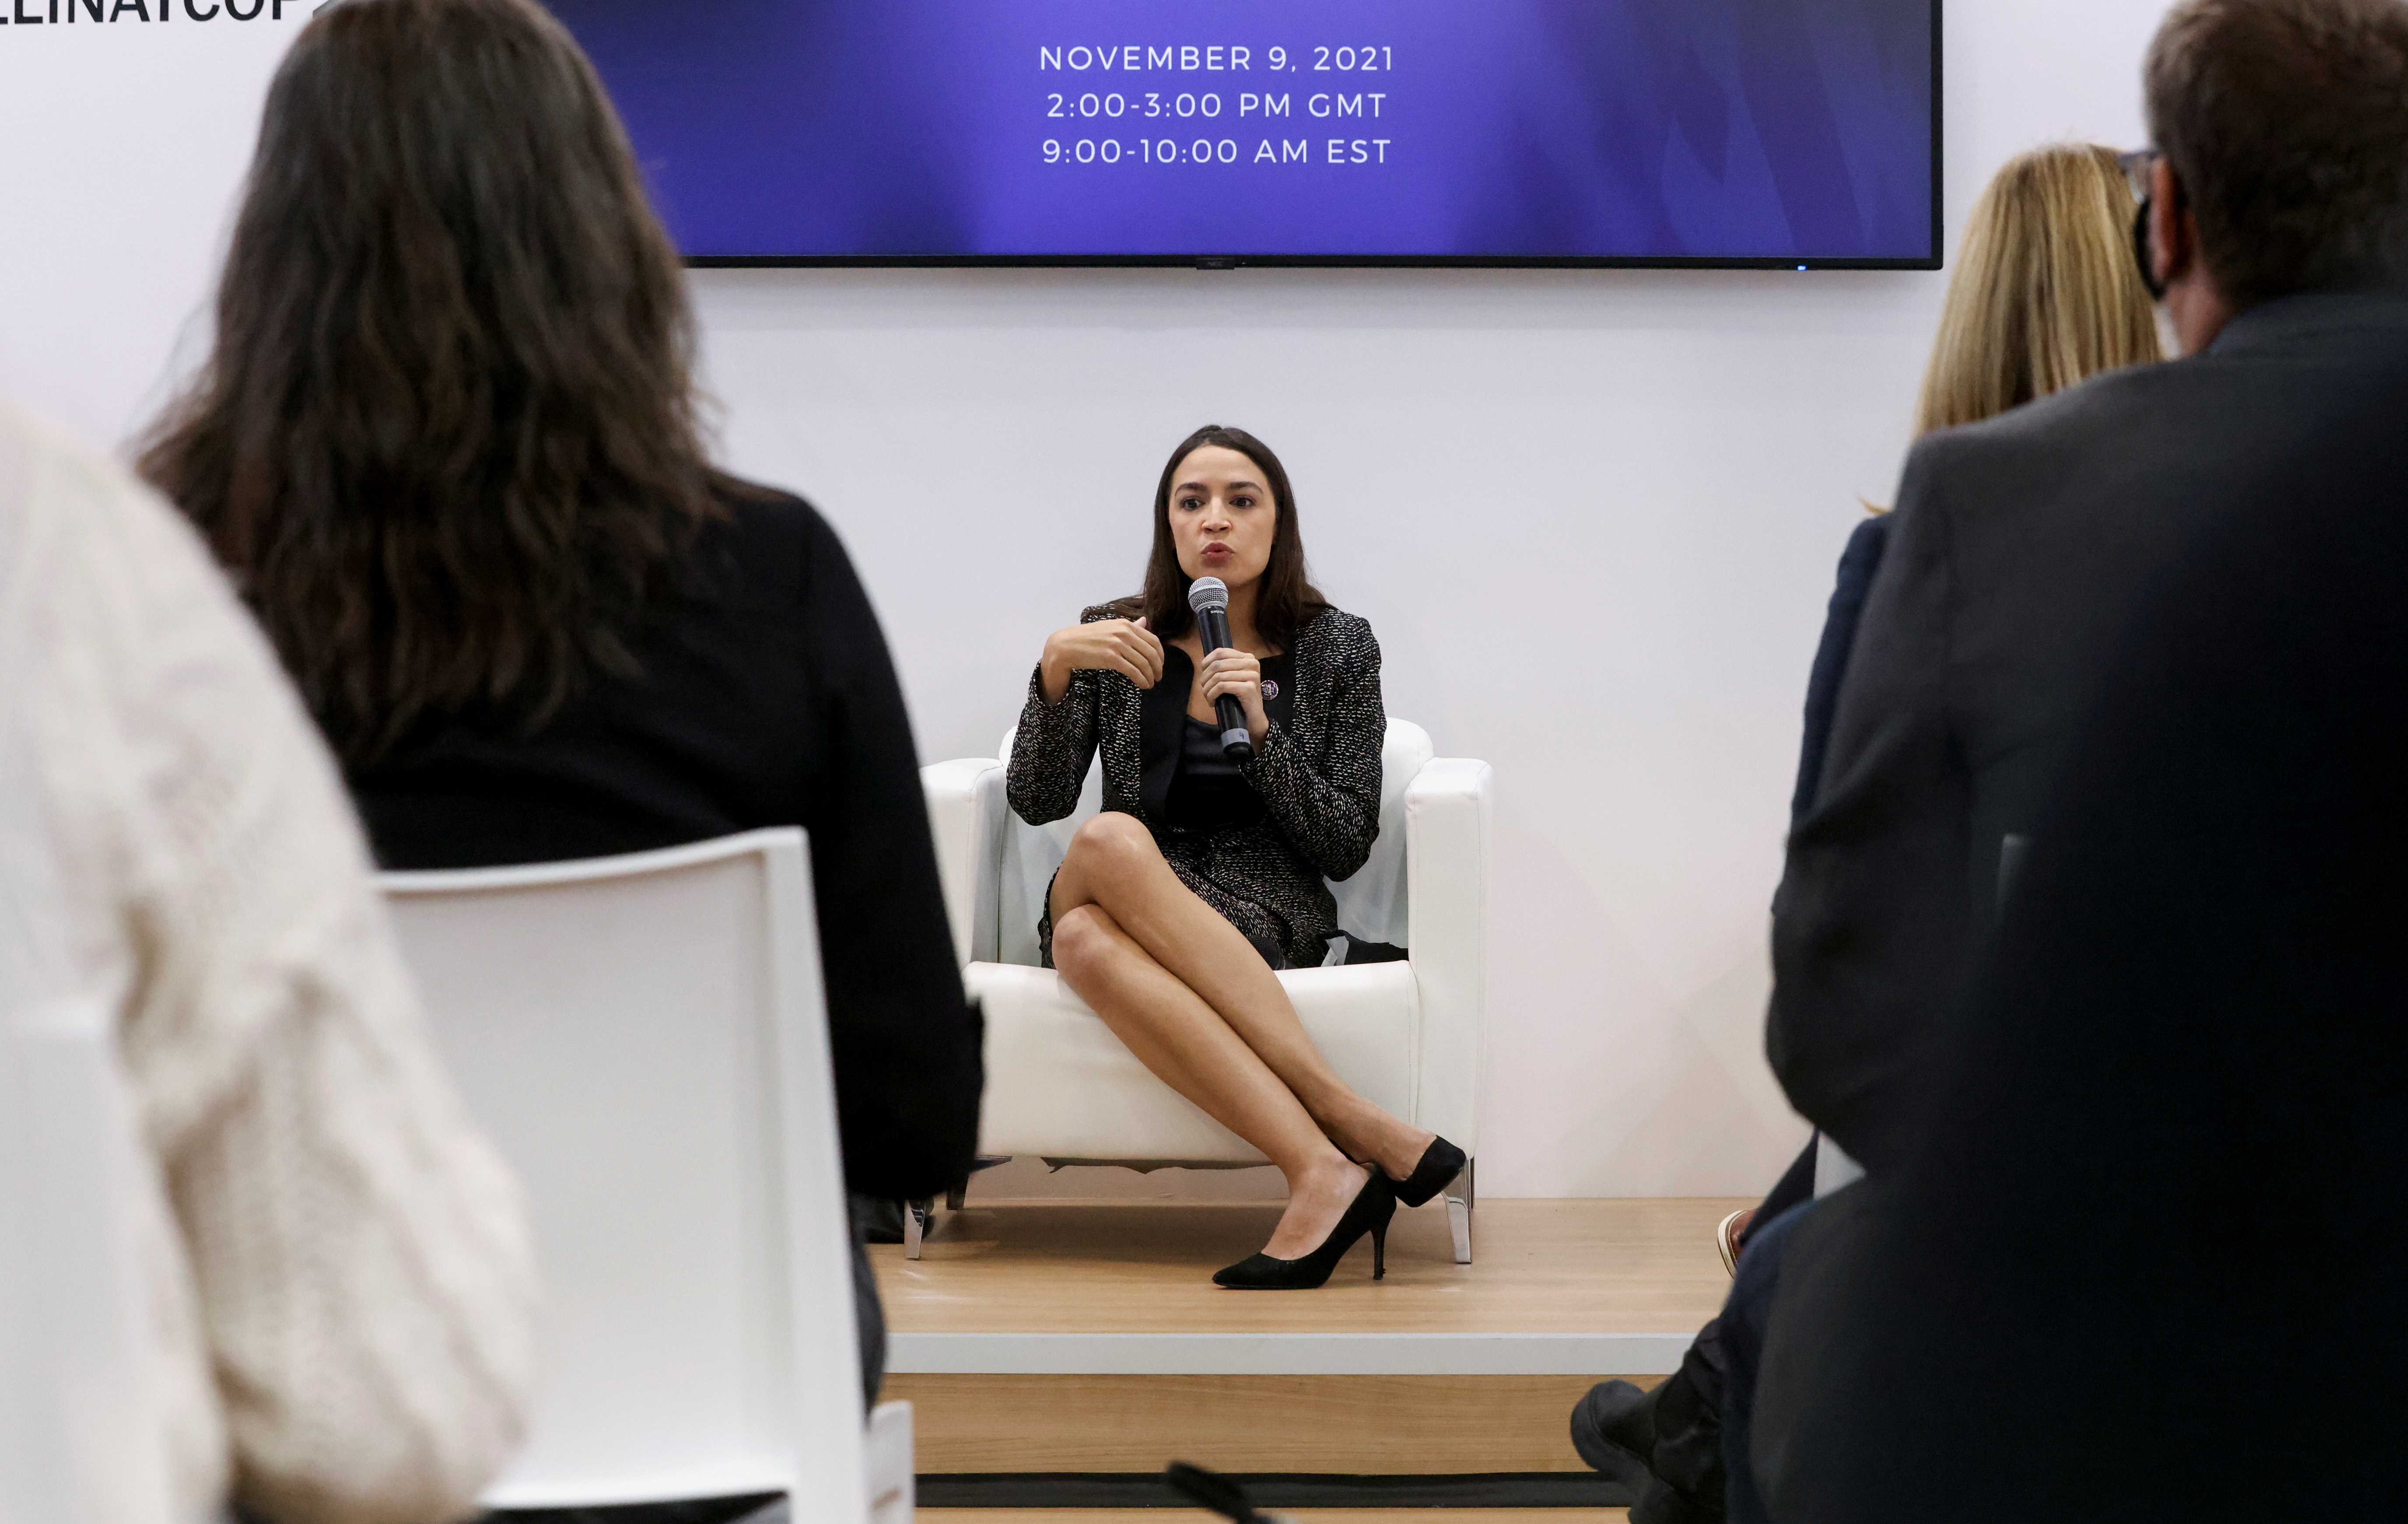 U.S. Representative Alexandria Ocasio-Cortez addresses a panel in the U.S Climate Action Center during the UN Climate Change Conference (COP26) in Glasgow, Scotland, Britain, November 9, 2021. REUTERS/Yves Herman